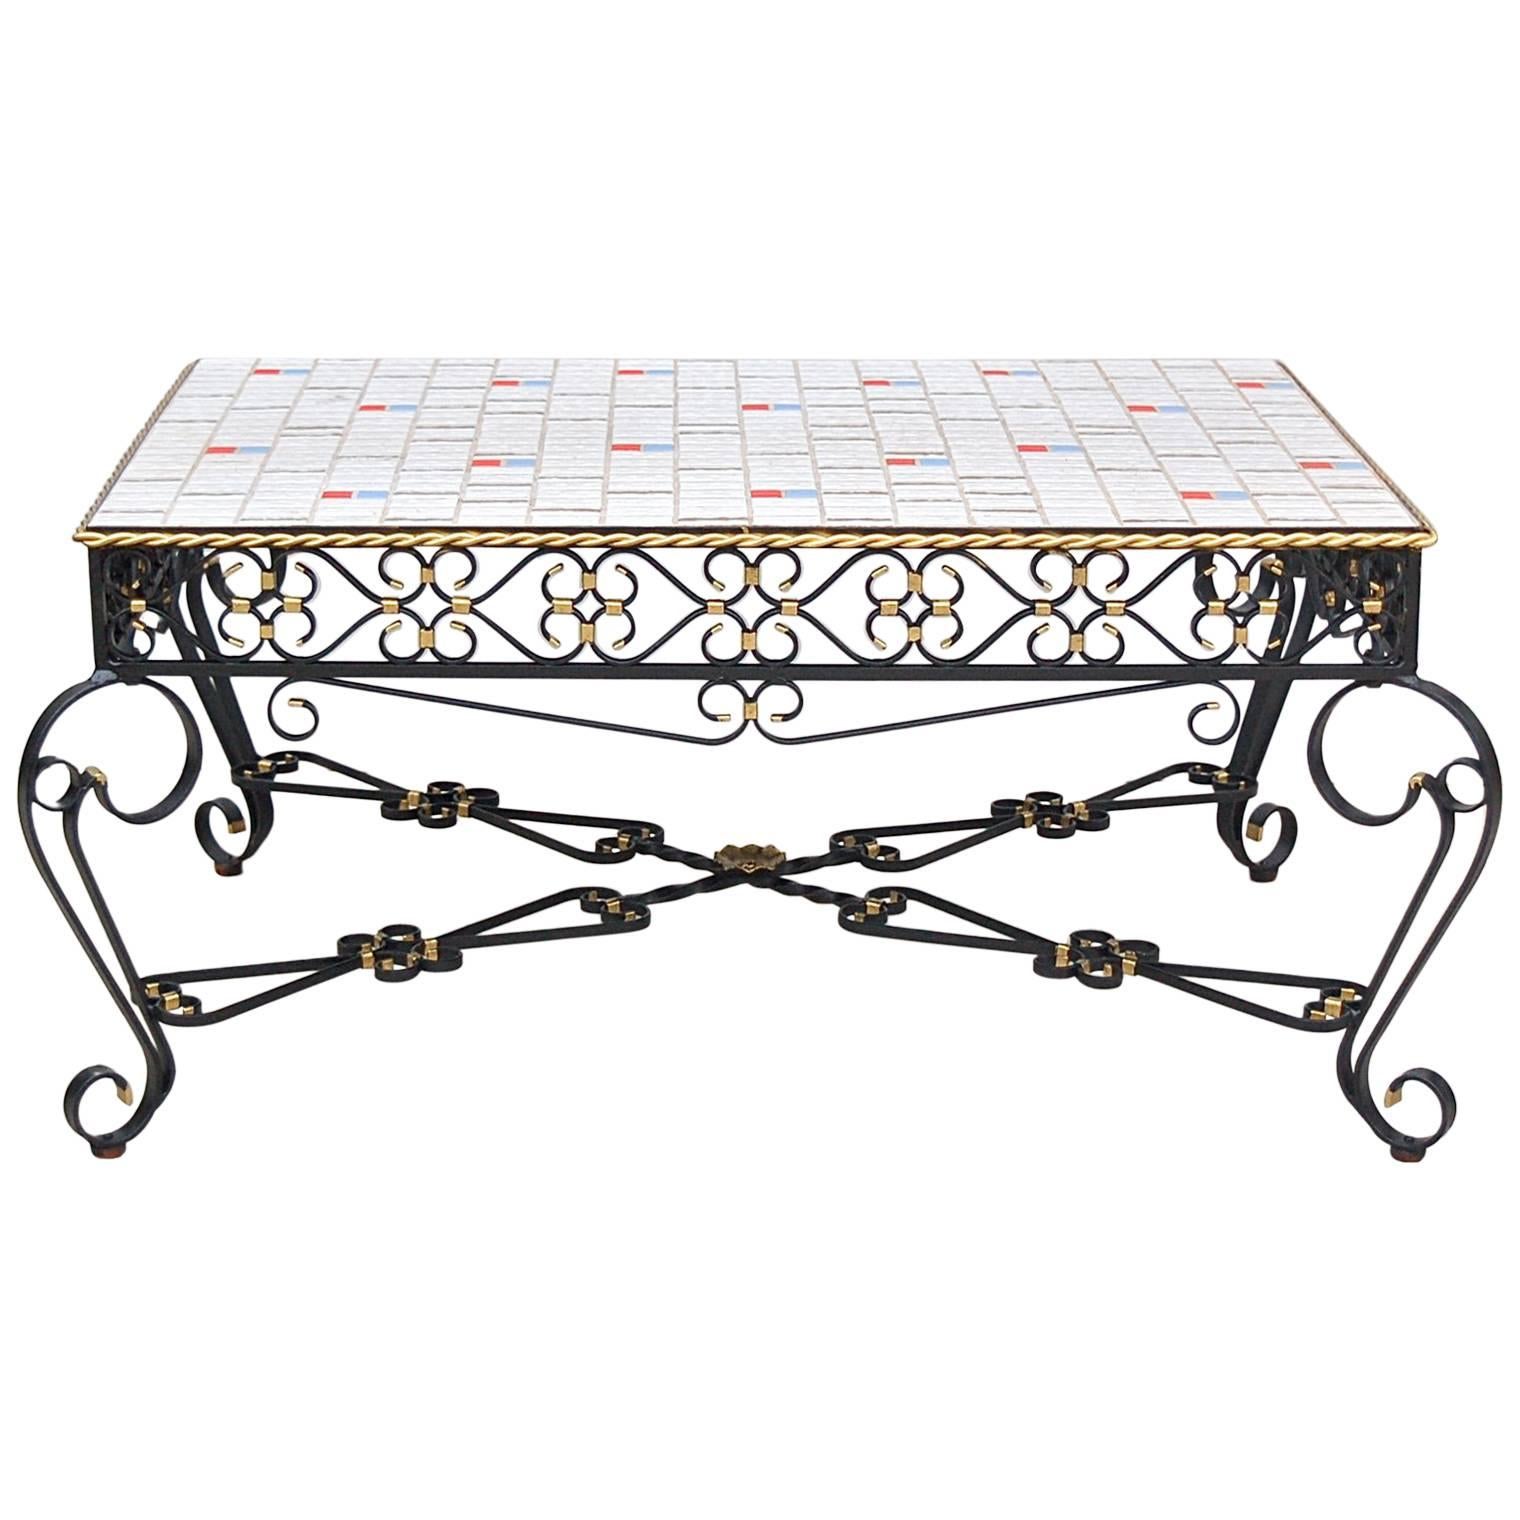 Wrought Metal Coffee Table with Mosaic Tiled Top, 1970s, France For Sale